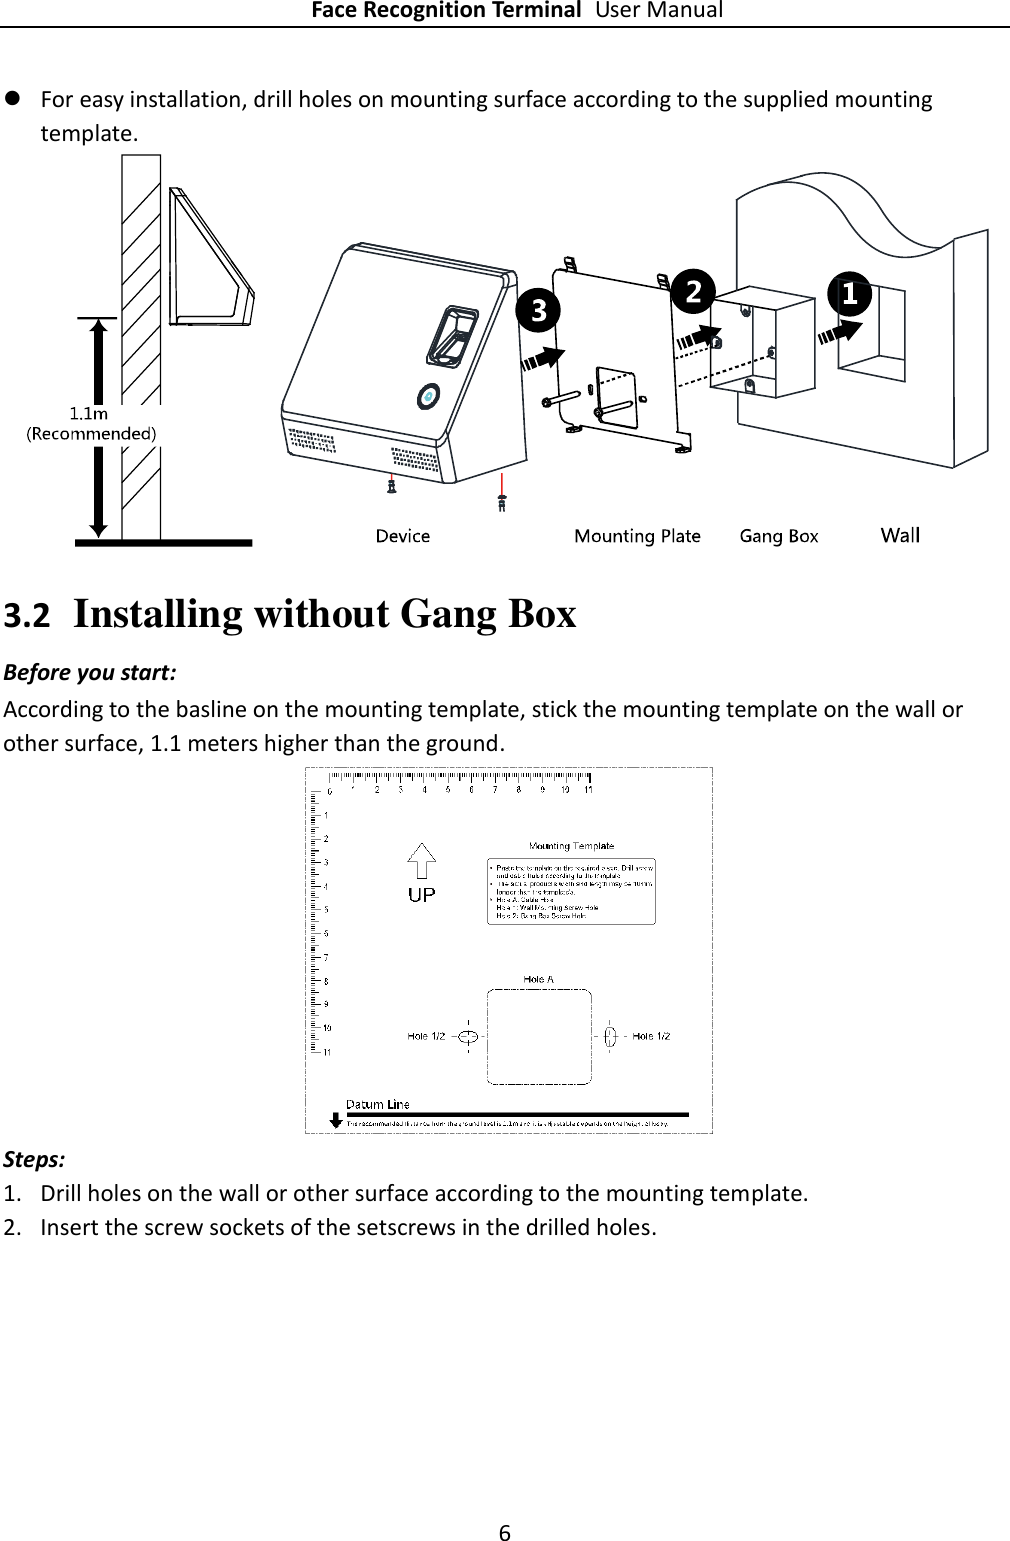 Face Recognition Terminal User Manual 6   For easy installation, drill holes on mounting surface according to the supplied mounting template.     3.2 Installing without Gang Box Before you start: According to the basline on the mounting template, stick the mounting template on the wall or other surface, 1.1 meters higher than the ground.   Steps: 1. Drill holes on the wall or other surface according to the mounting template. 2. Insert the screw sockets of the setscrews in the drilled holes. 